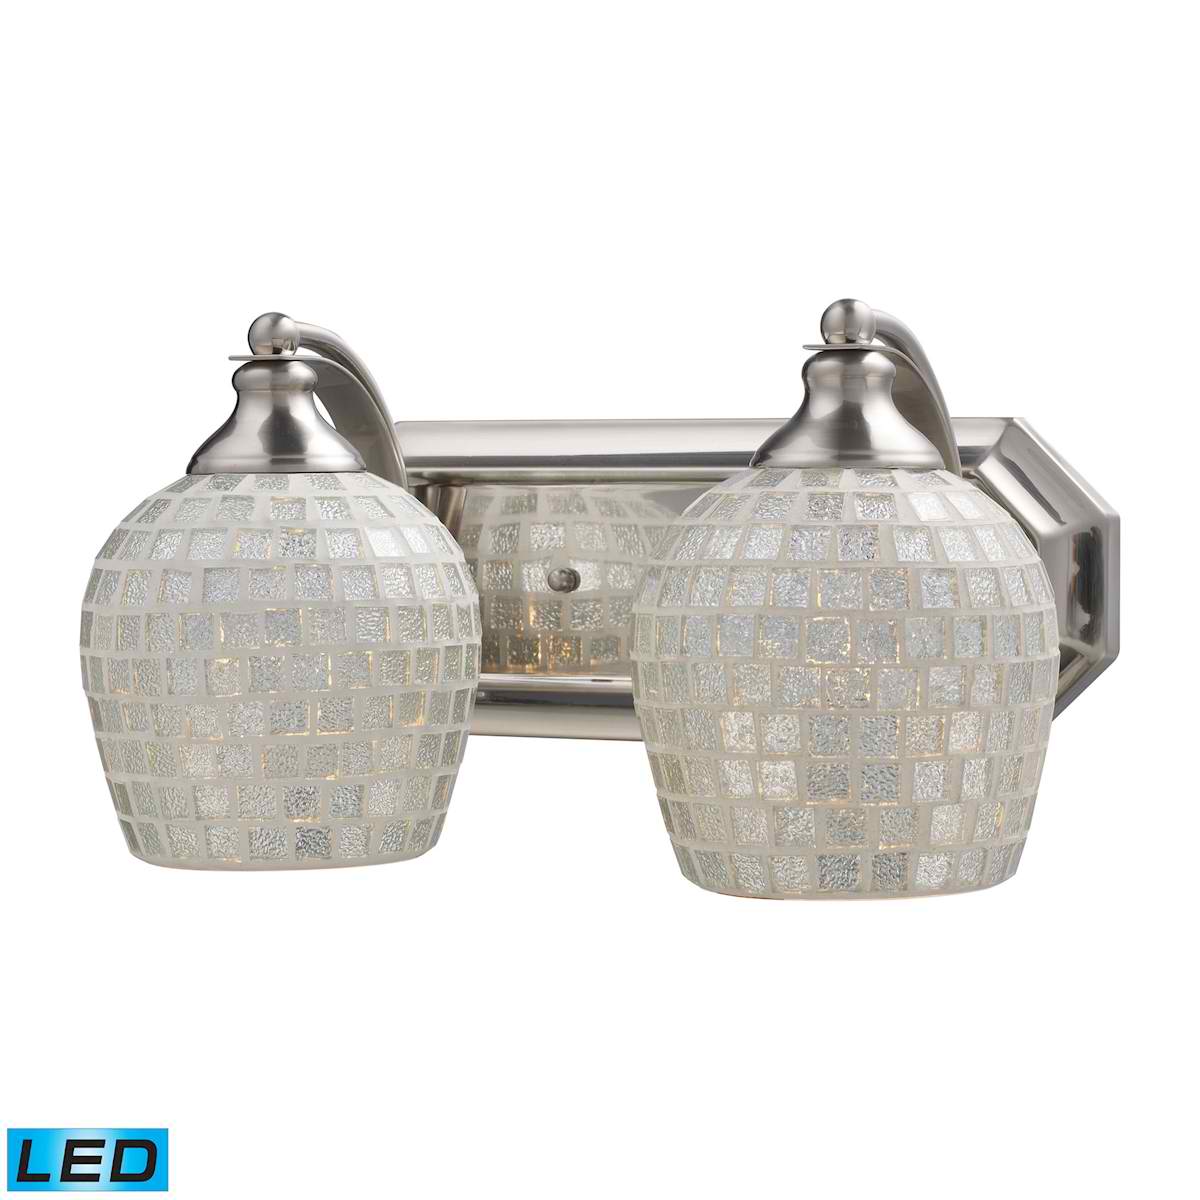 2 Light Vanity in Satin Nickel and Silver Mosaic Glass - LED, 800 Lumens (1600 Lumens Total) with Full Scale